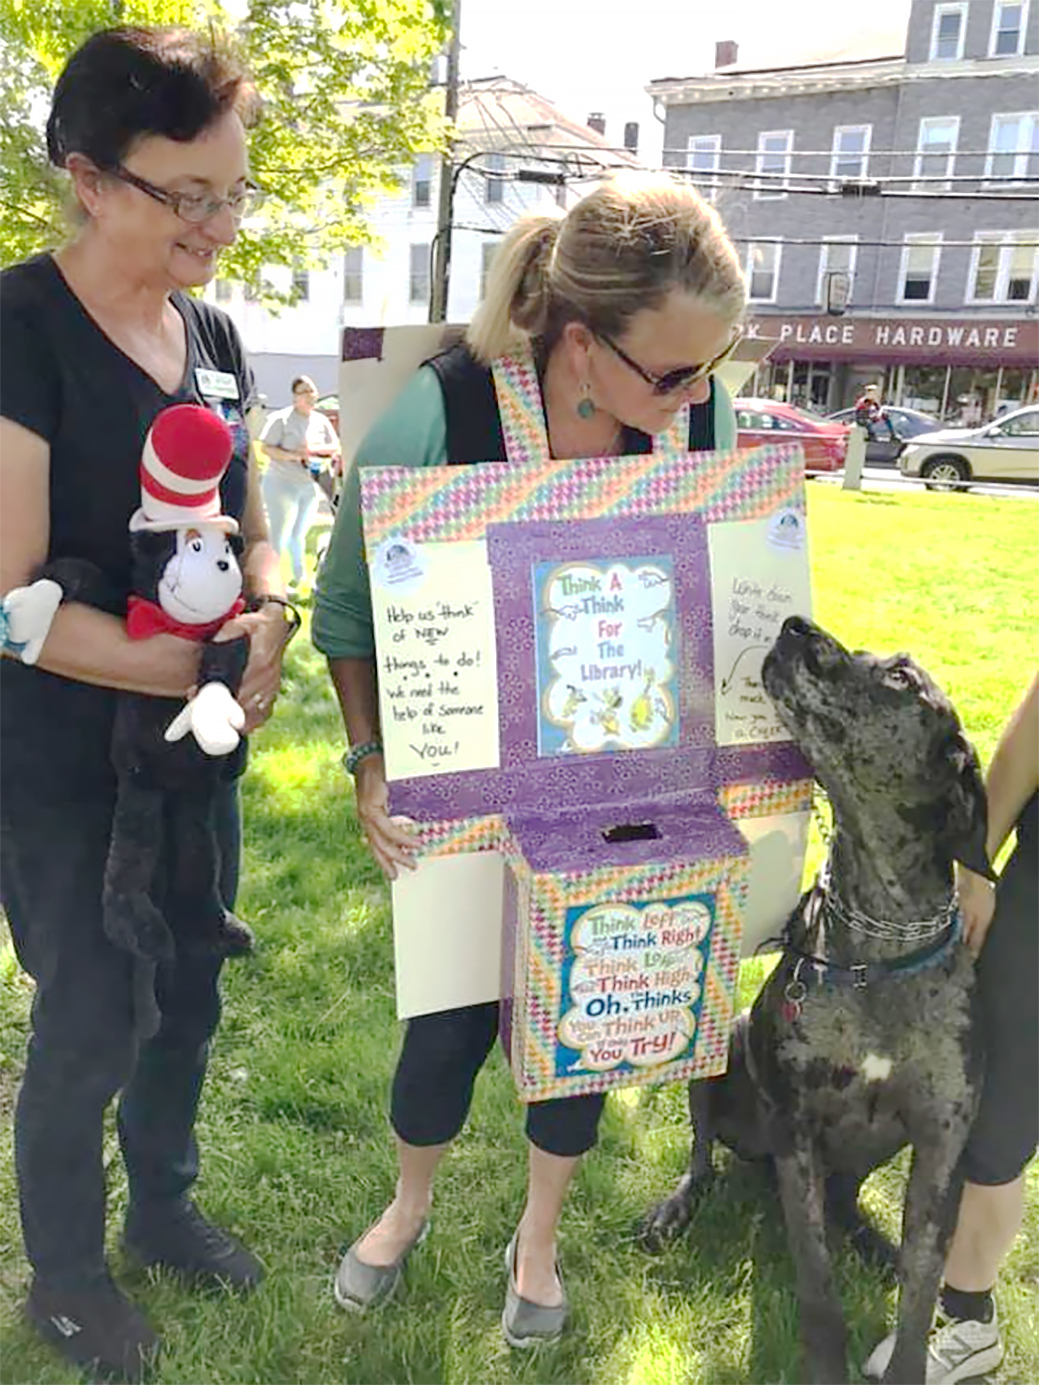 Photo: Beardsley (CT) Public Library attends the annual town Pet Parade to ask the public to “Think a think” about what they want to learn; used with permission